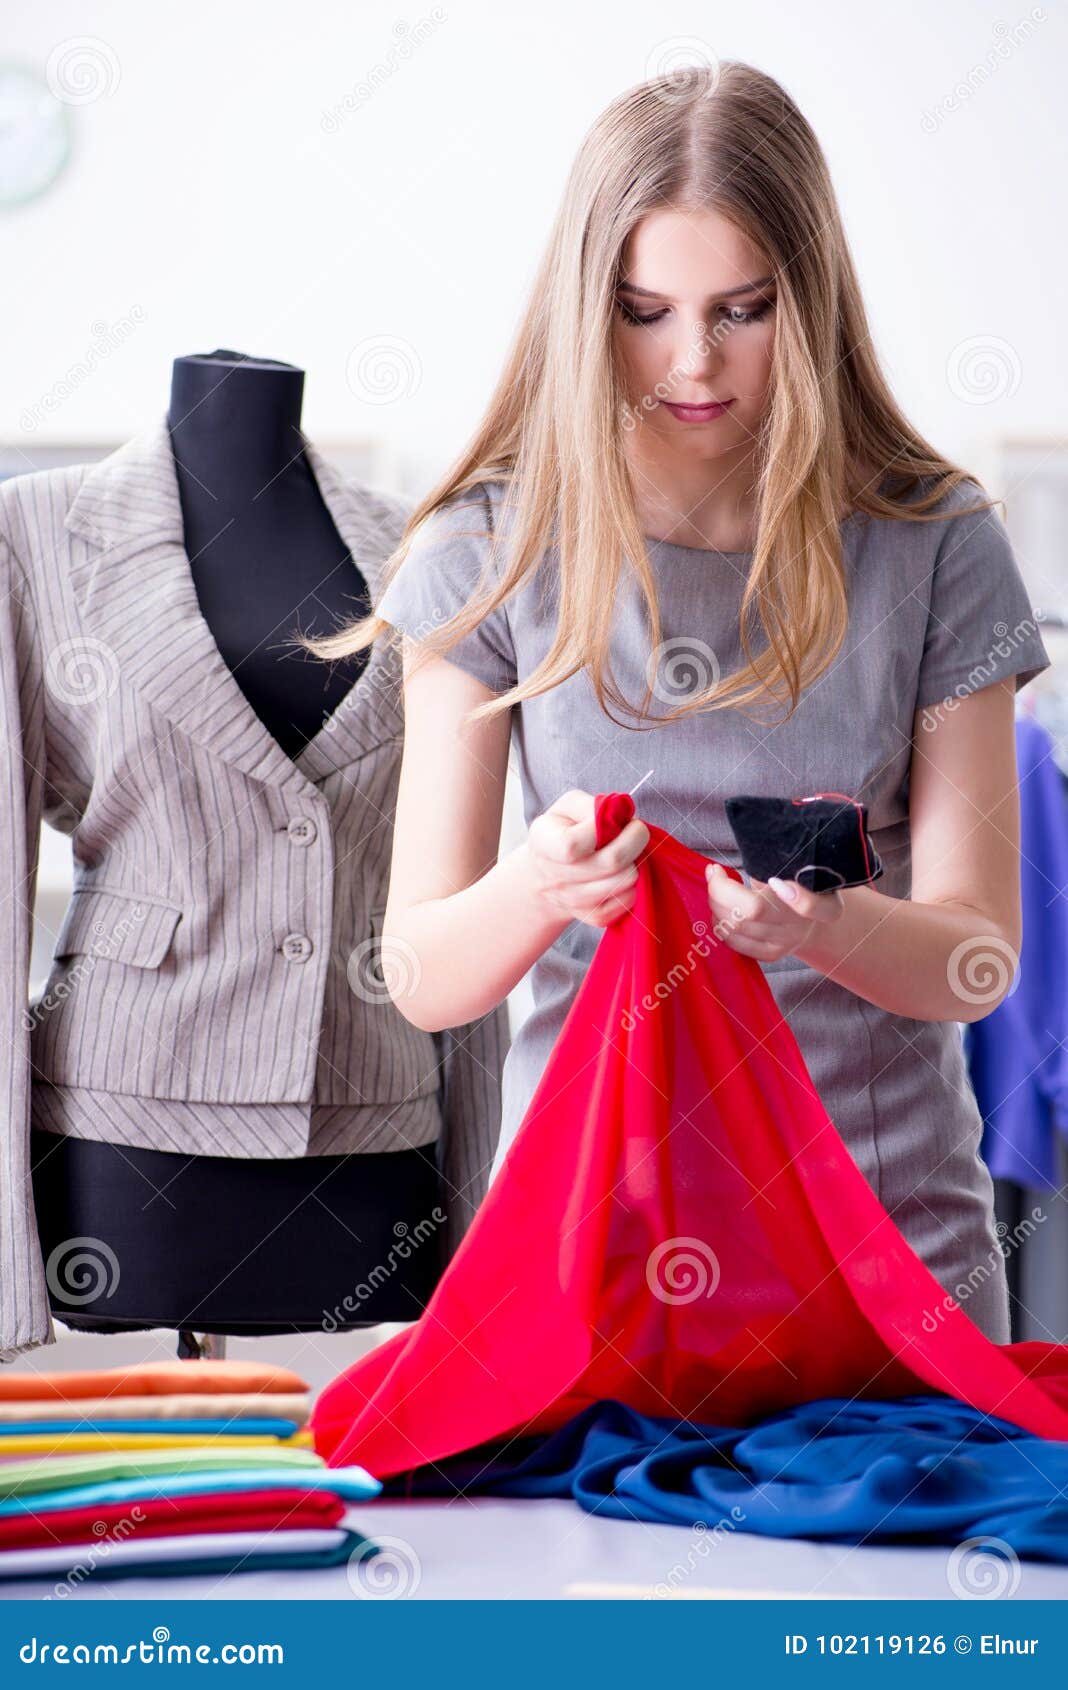 The Young Woman Tailor Working in Workshop on New Dress Stock Photo ...